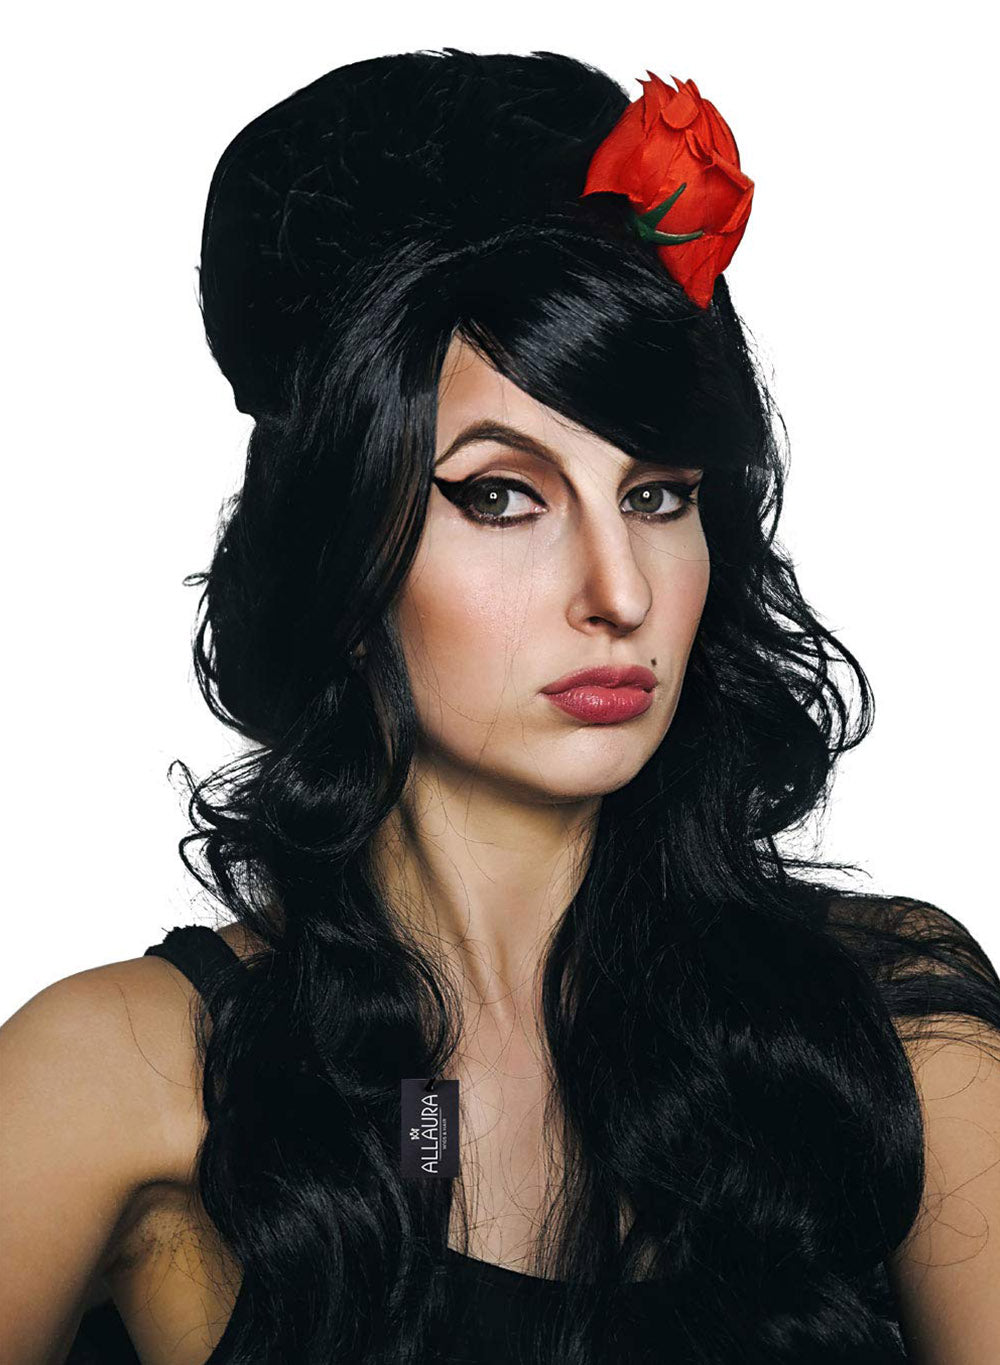 Black Beehive Wig + Red Flower Costume Wig Set - Amy Winehouse